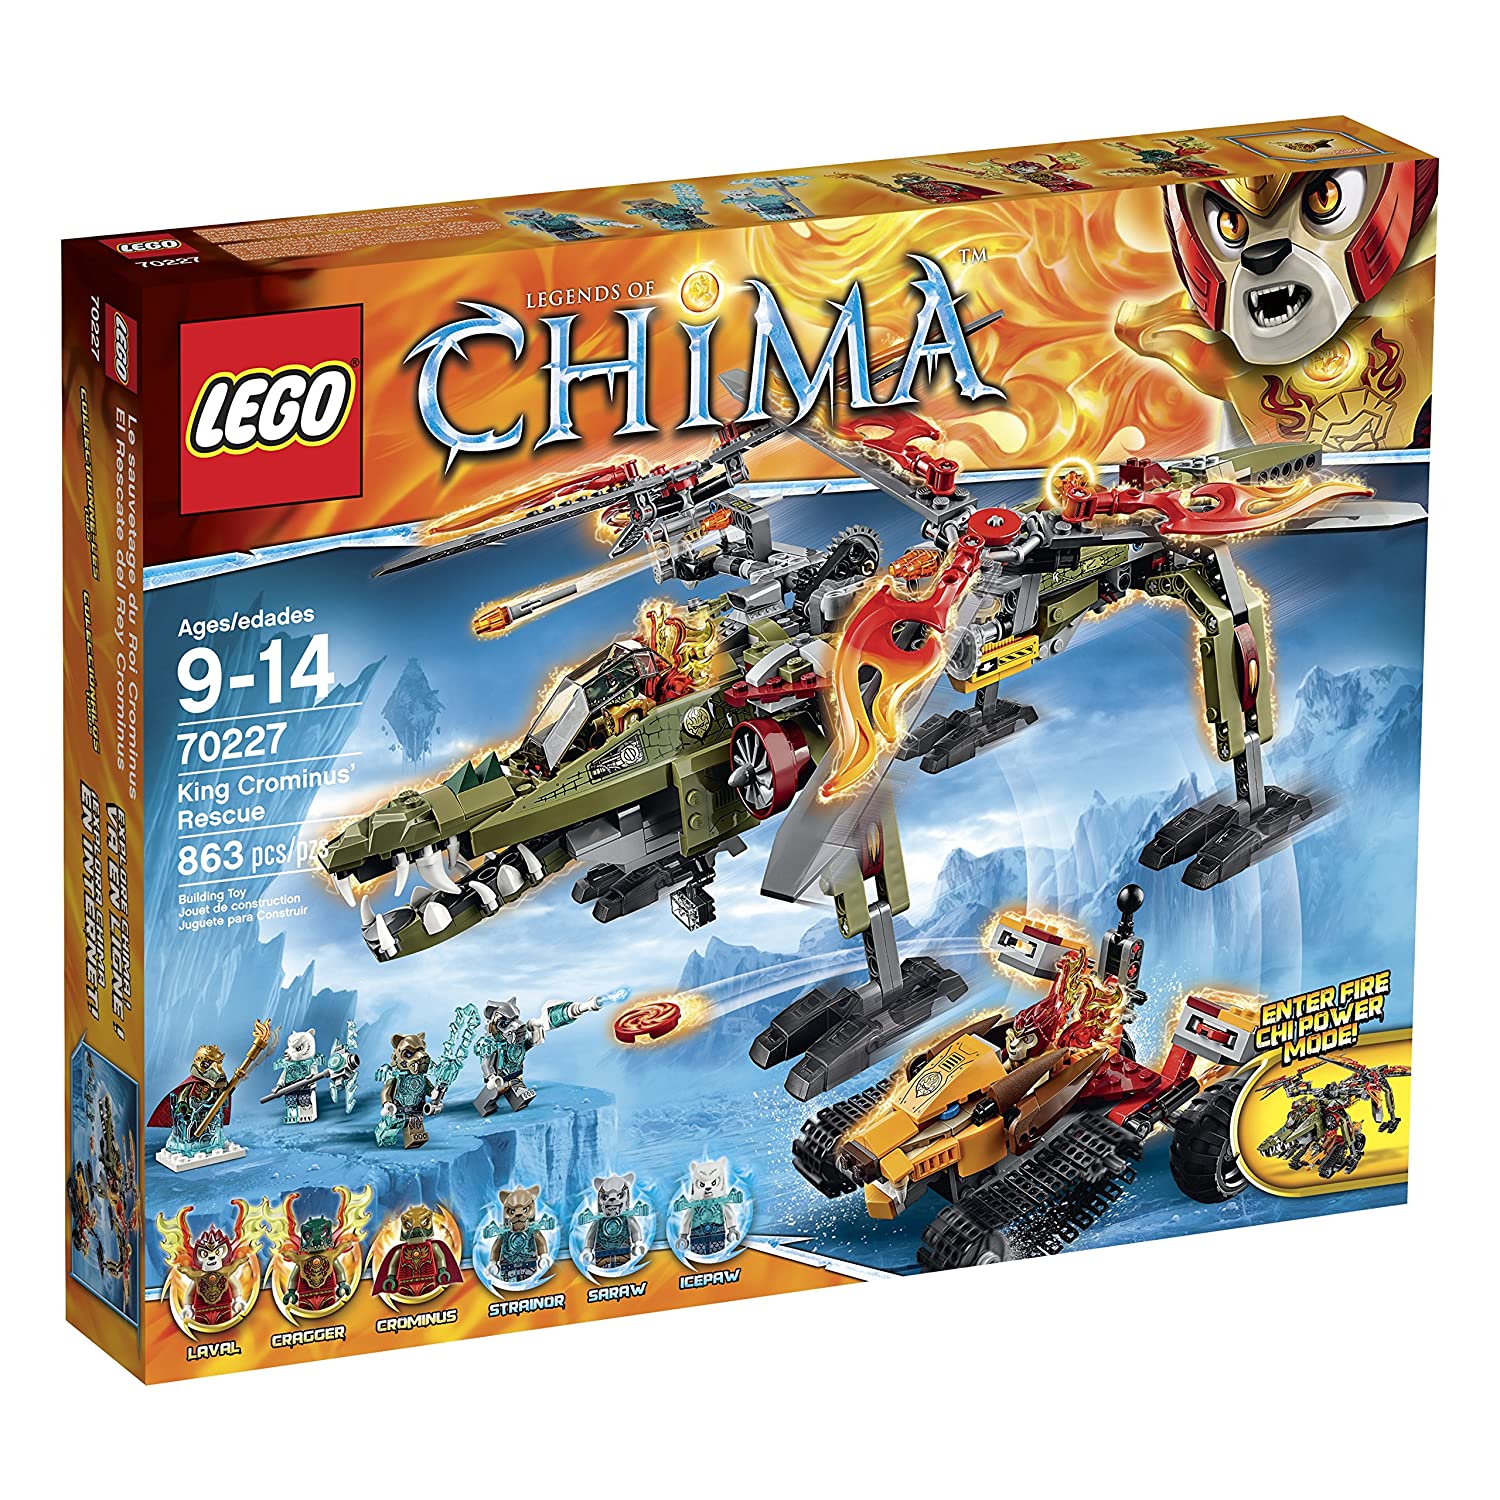 9 Best LEGO Chima Sets 2022 - Buying Guide & Reviews 6